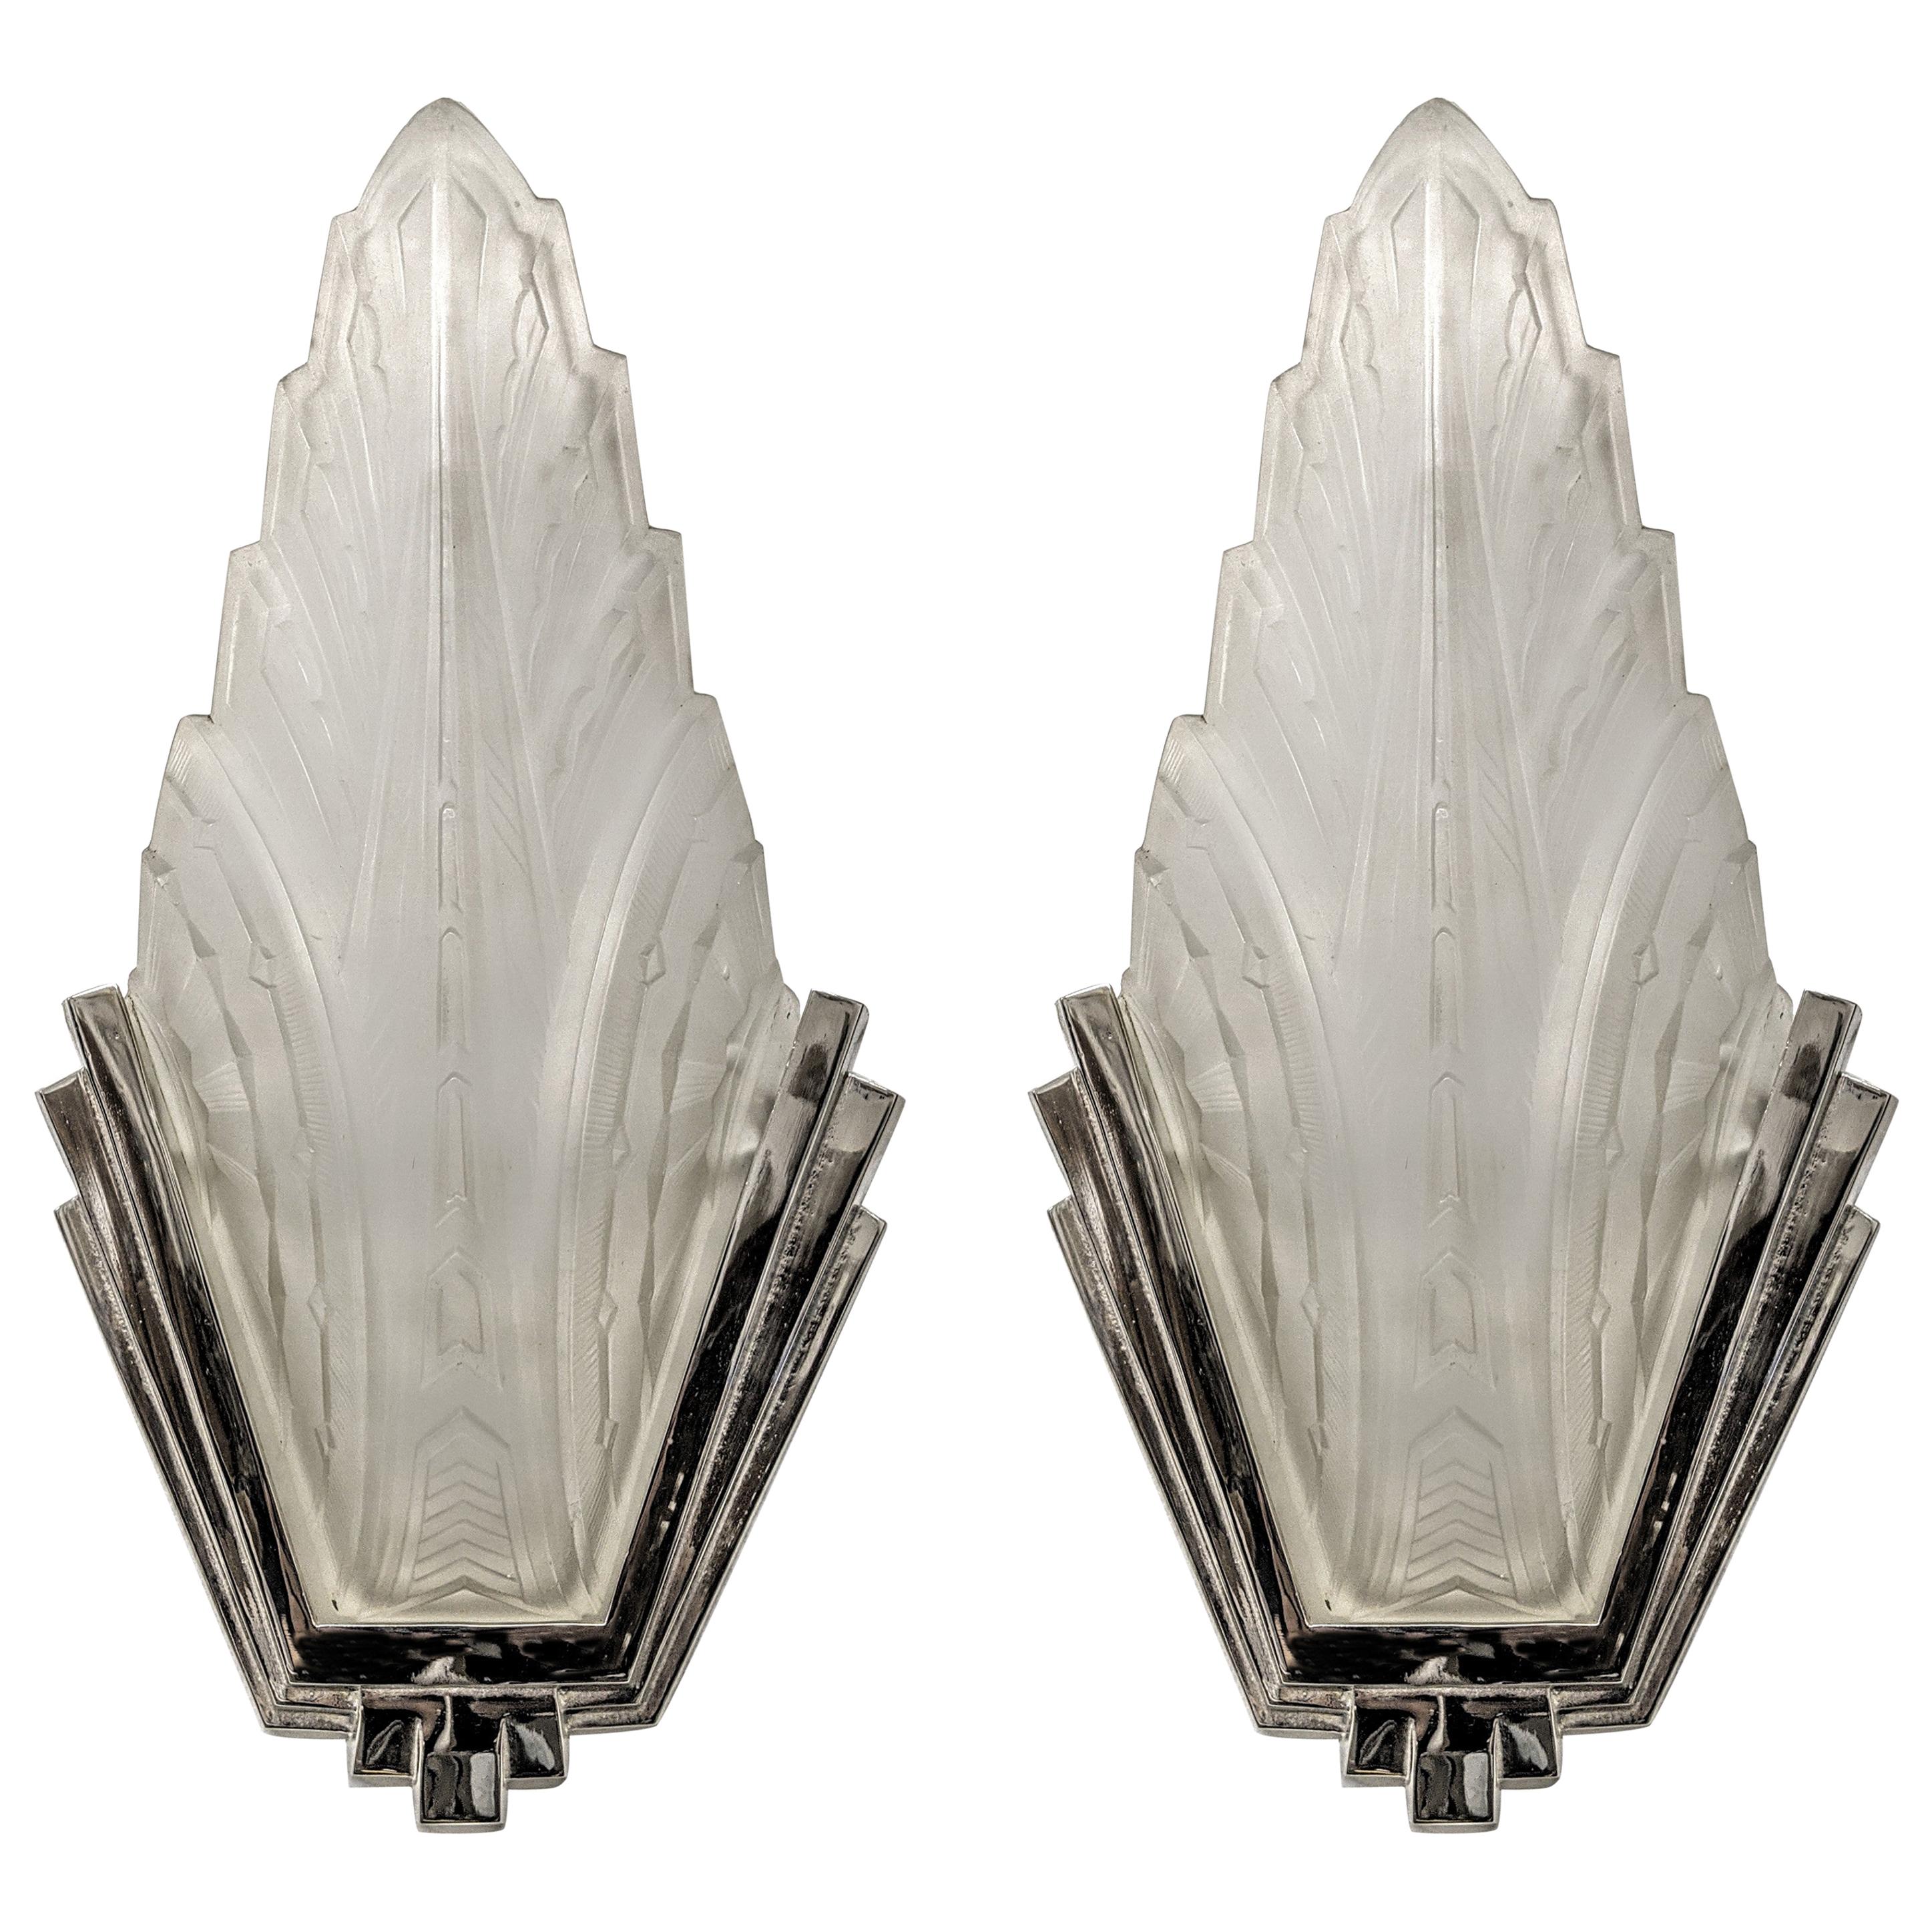 Pair of French Art Deco Wall Sconces Signed by Hanots (two pair available) For Sale